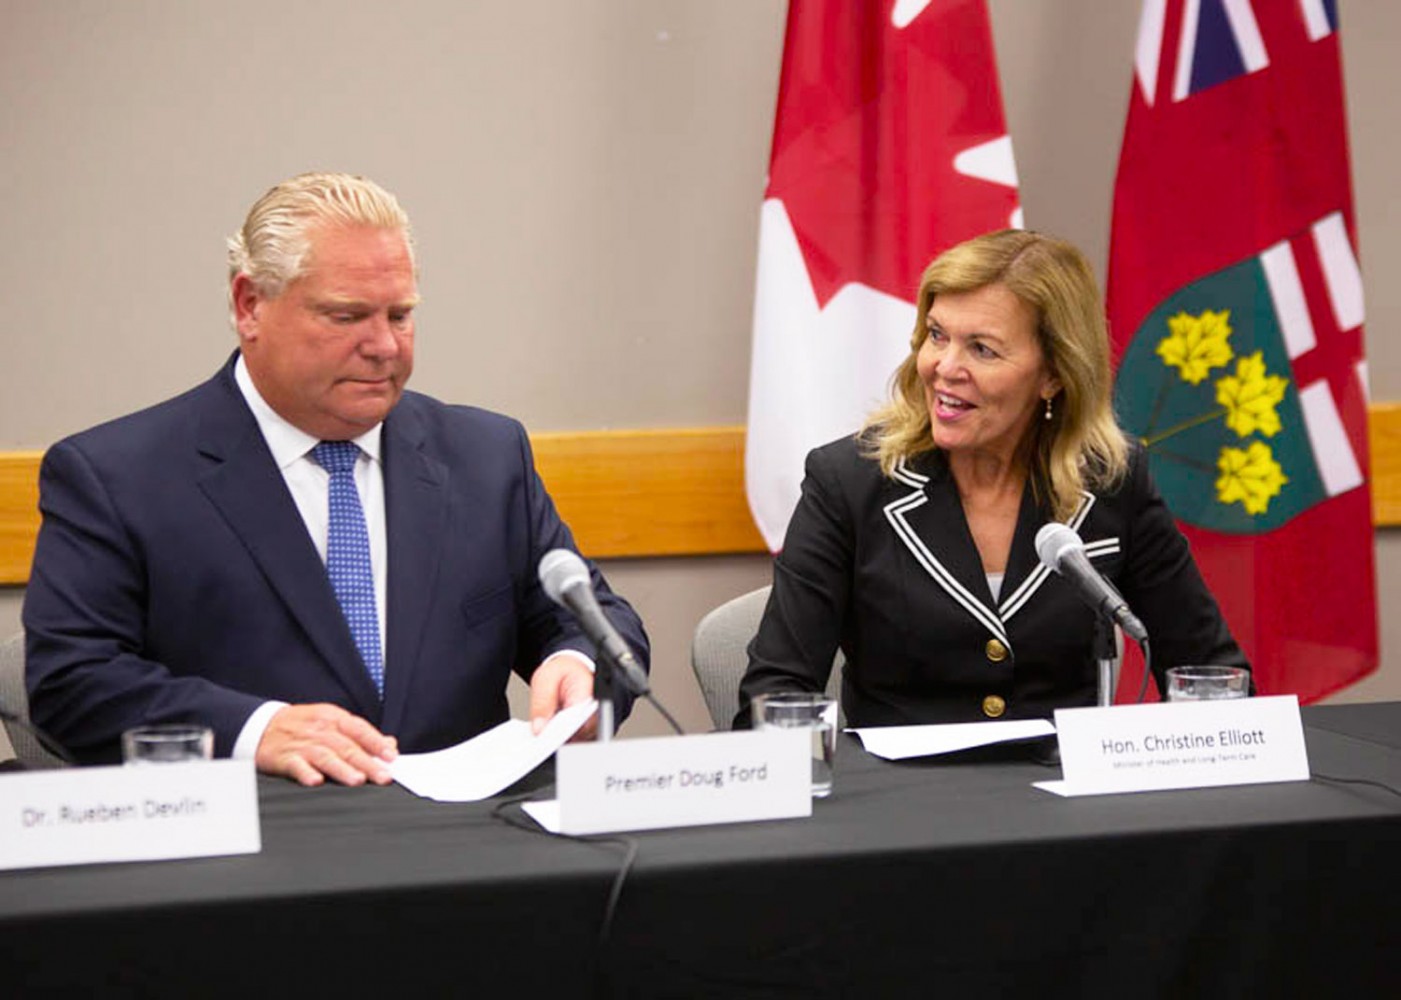 Premier Doug Ford’s healthcare announcement offers next to nothing for Brampton